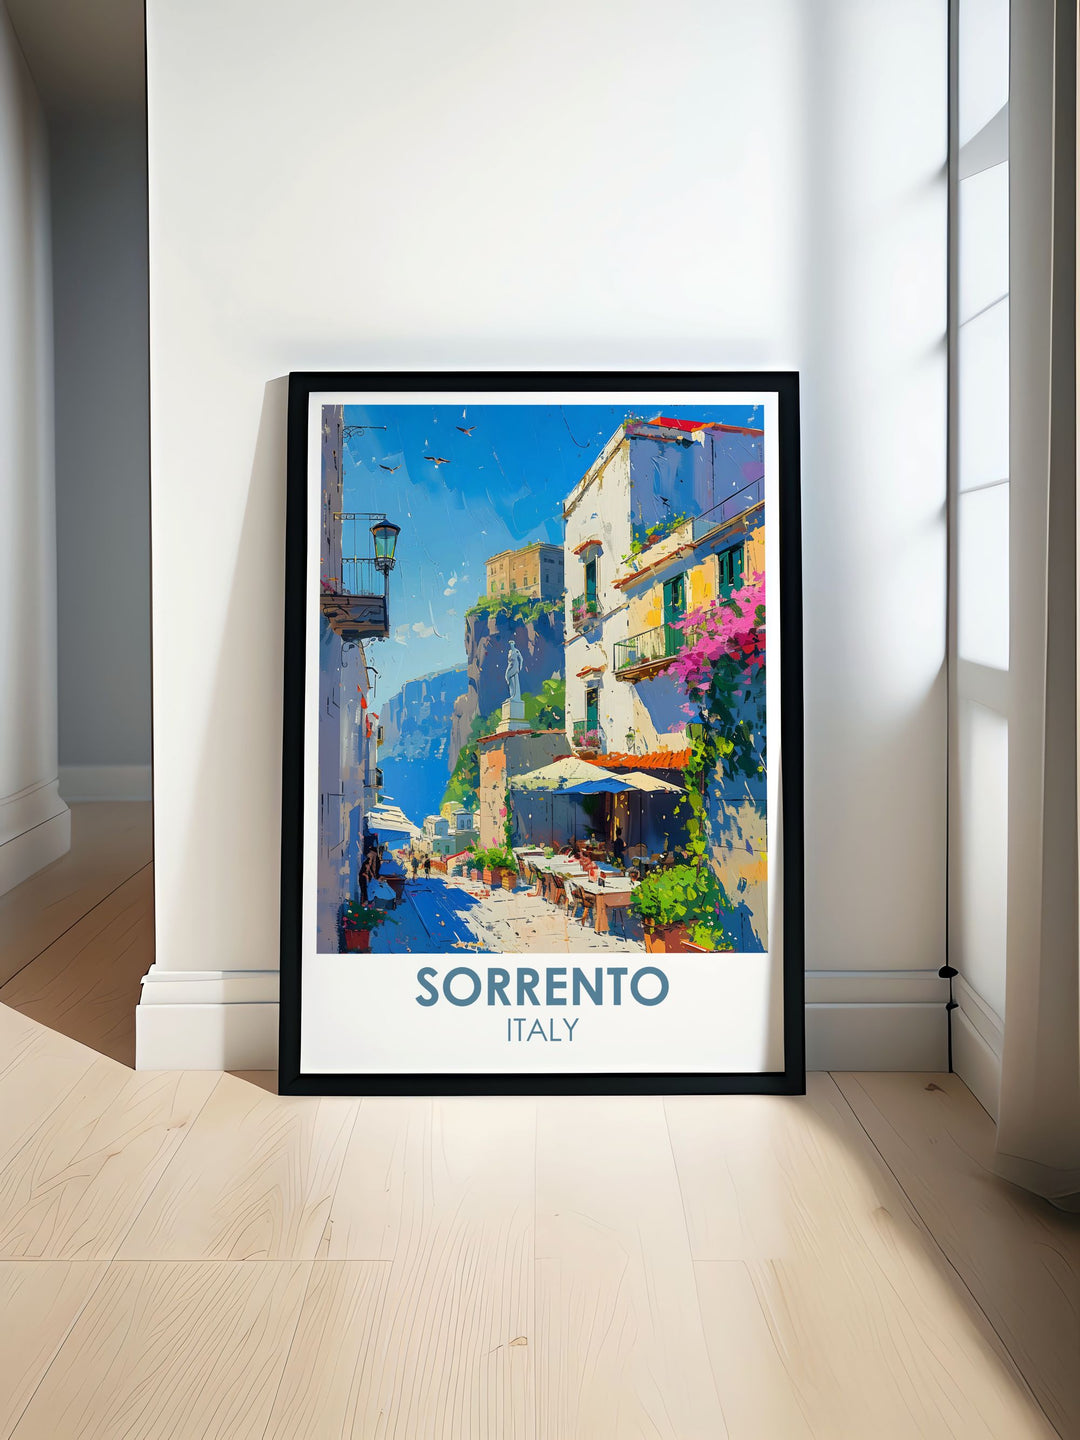 Sorrento travel poster featuring Piaza Tasso and vibrant street life perfect for adding Italian charm to any space. Detailed Italy print capturing the essence of Sorrento Italy with vibrant colors and intricate design ideal for travel enthusiasts and home decor.